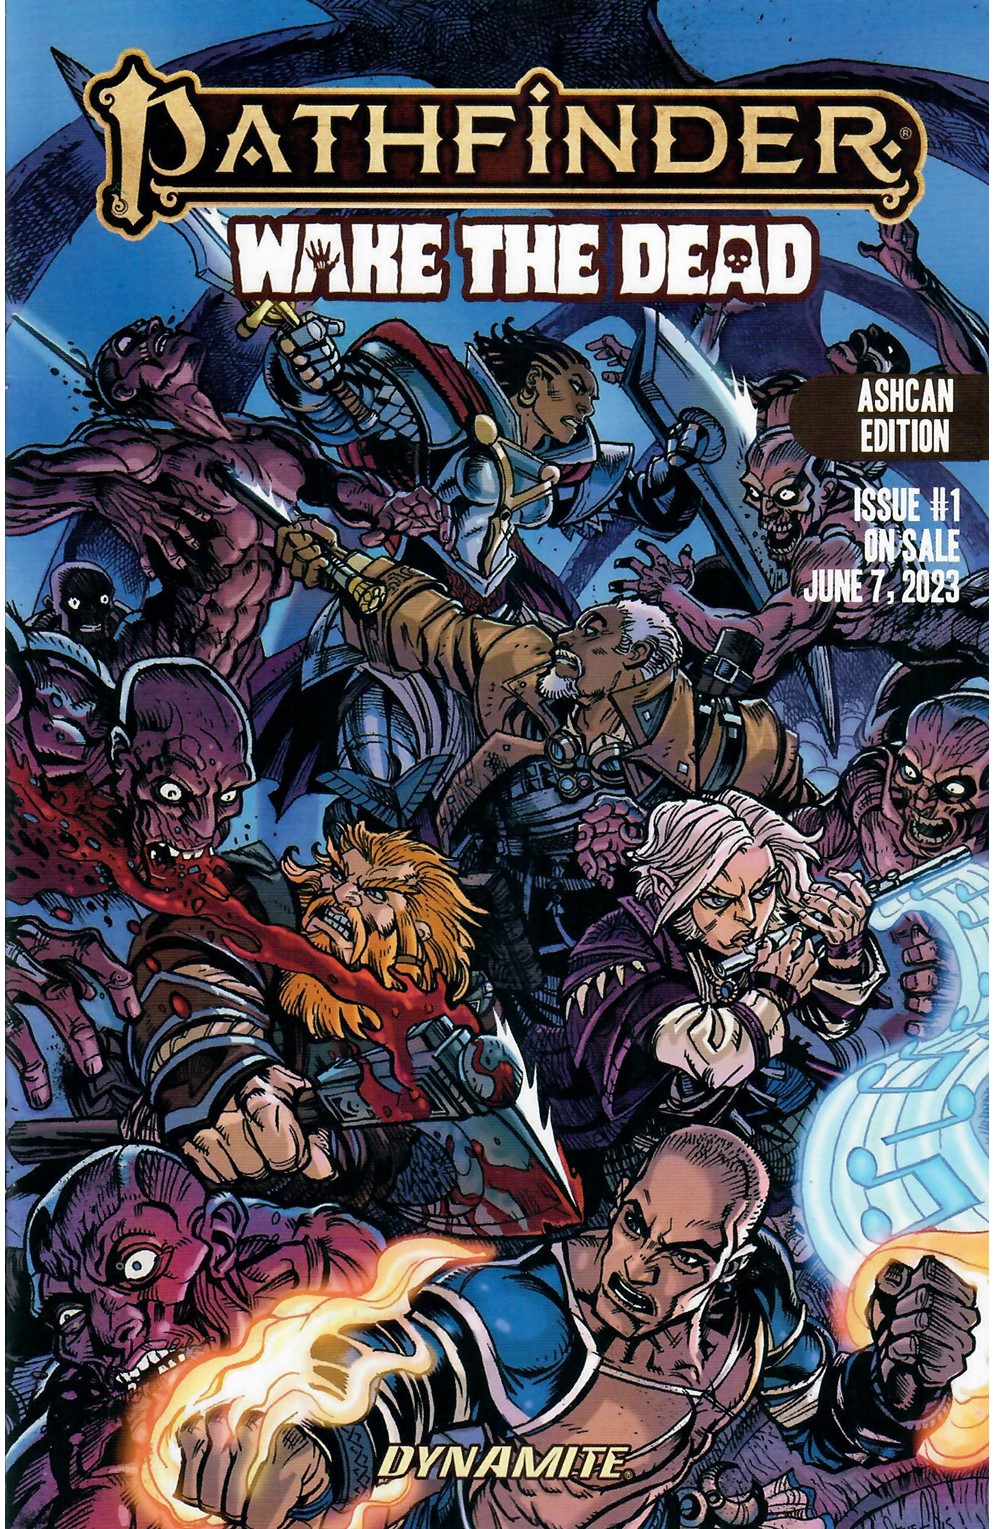 Pathfinder Wake The Dead #0 Ashcan Preview